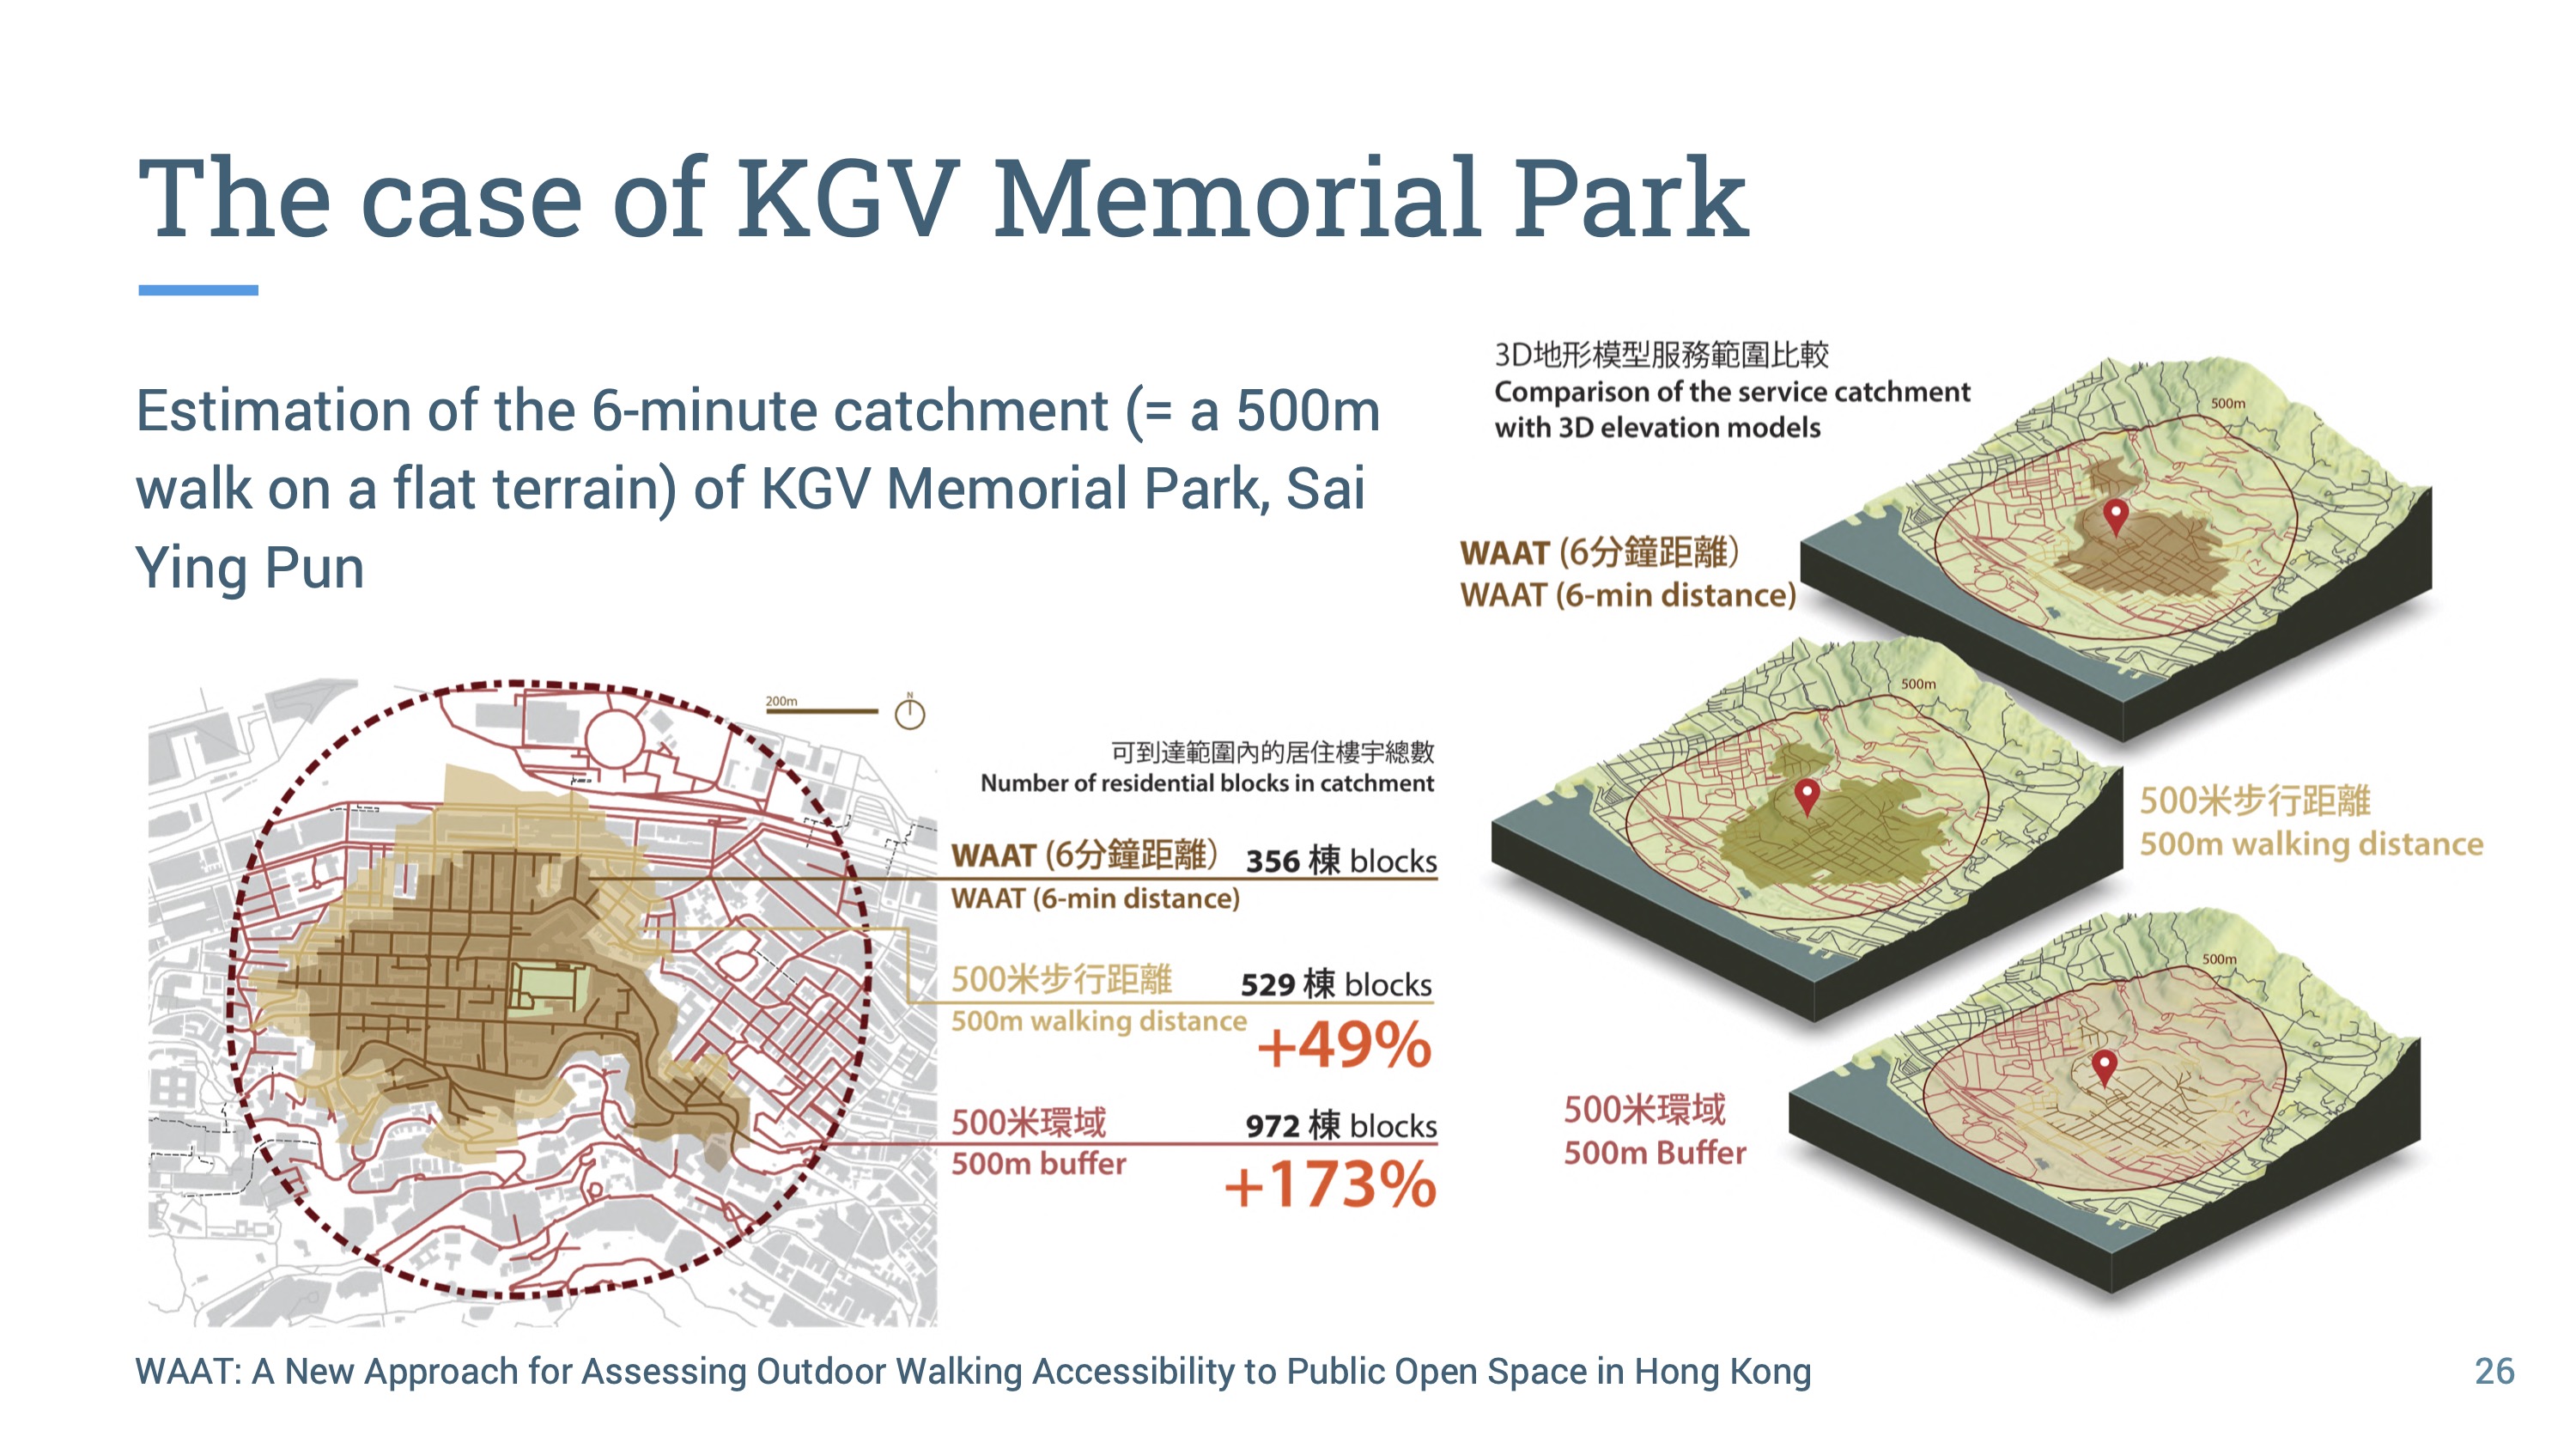 Comparing the reachable area of KGV Memotrial Park between WAAT and traditional methods